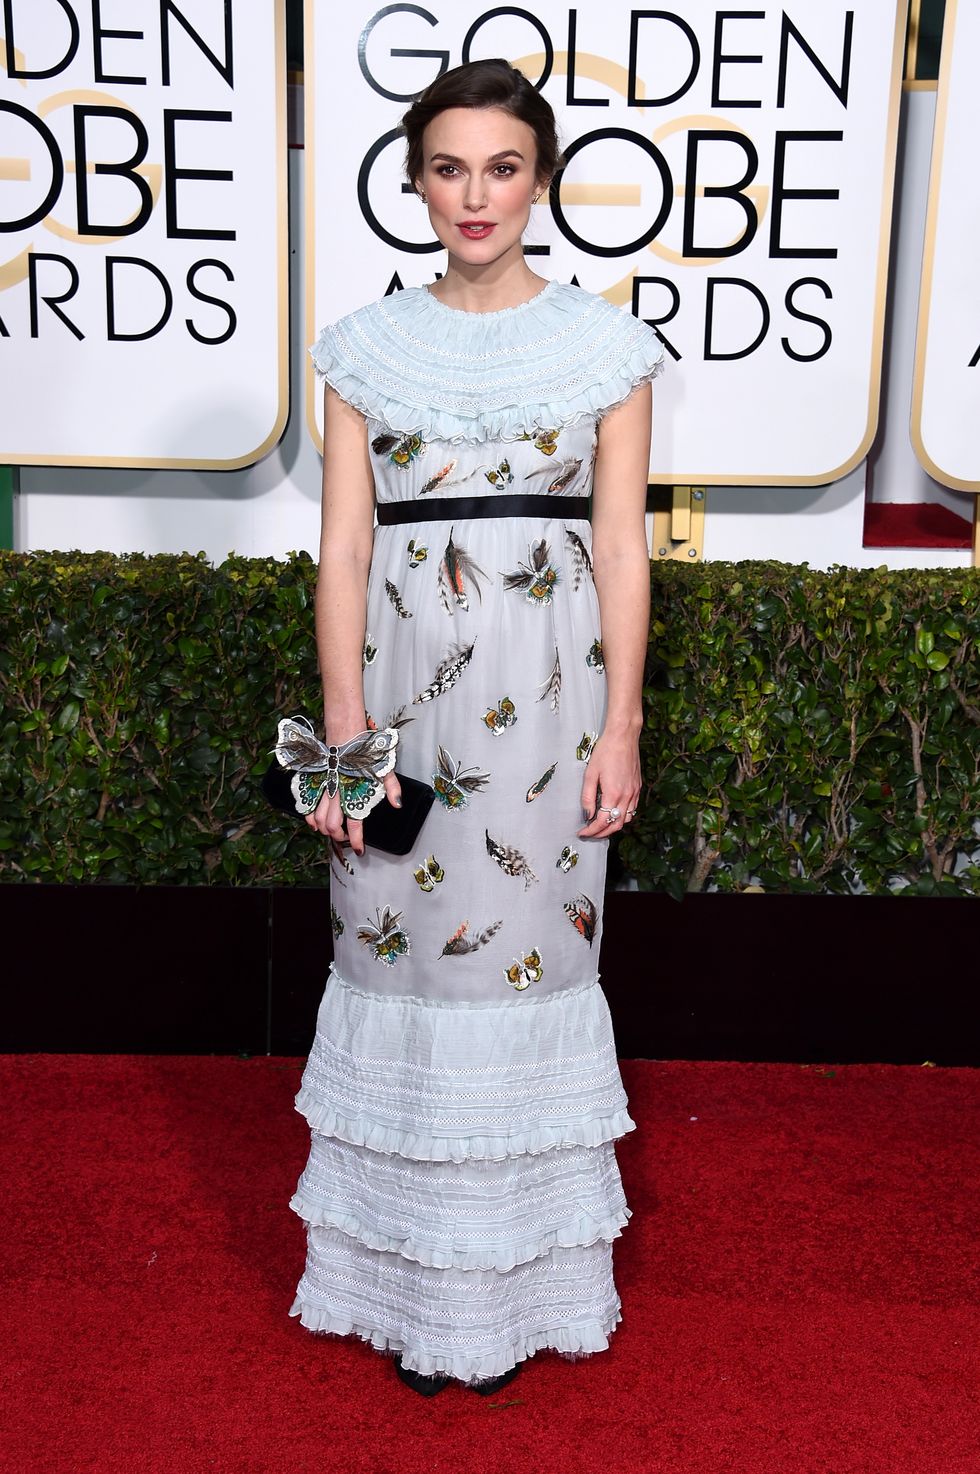 Pregnant Keira Knightley wearing Chanel at the 2015 Golden Globes